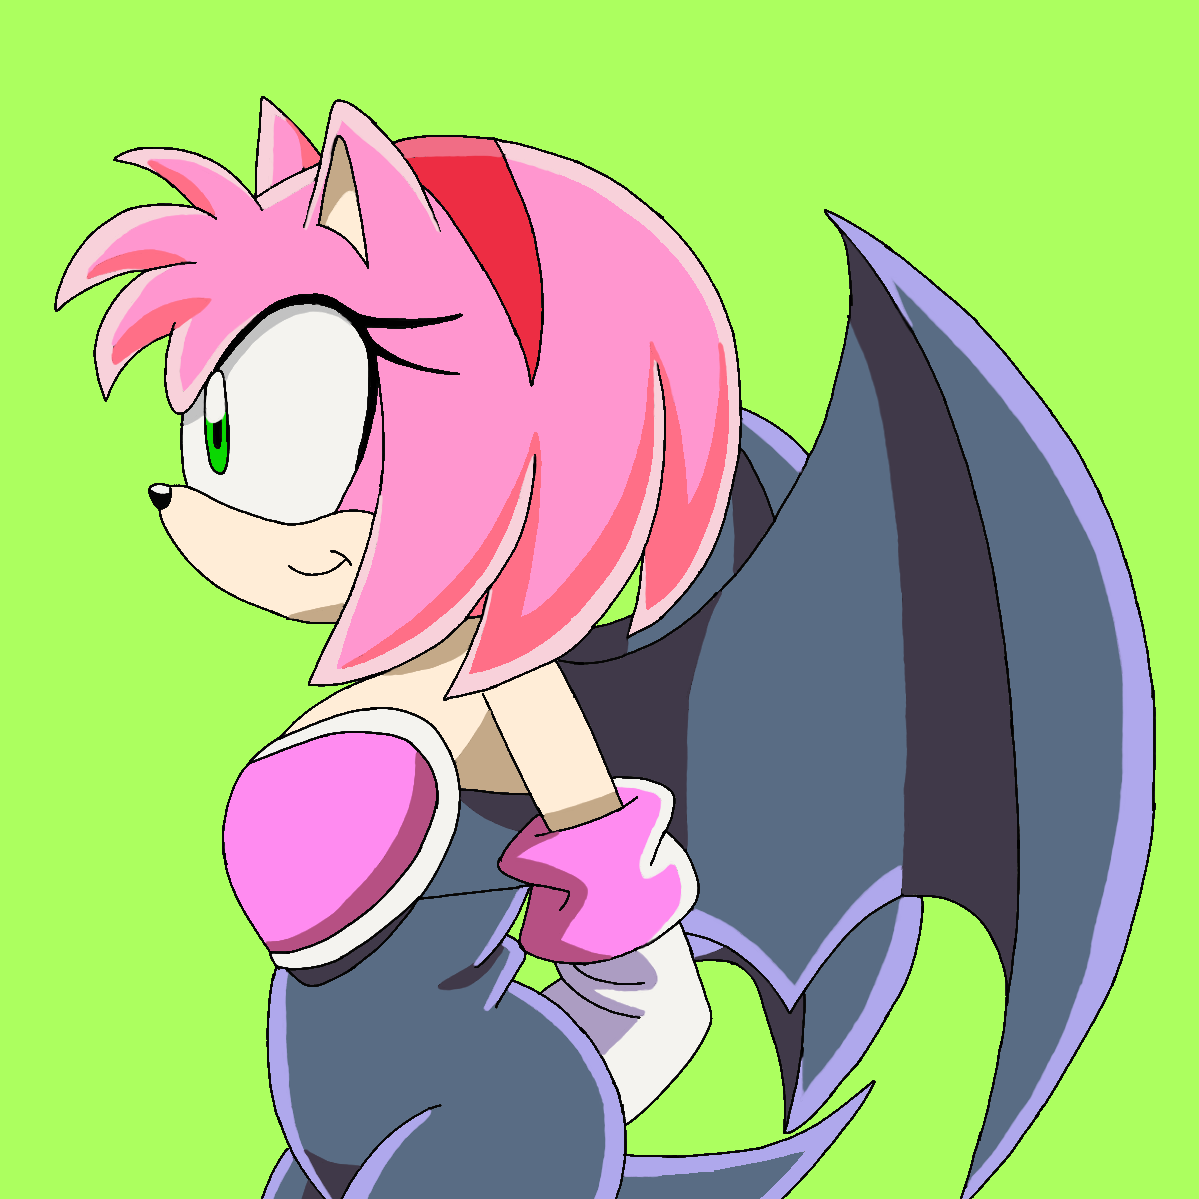 Amy Rose Sonic the Hedgehog Sonic X Doctor Eggman sonic anime purple  mammal sonic The Hedgehog png  PNGWing